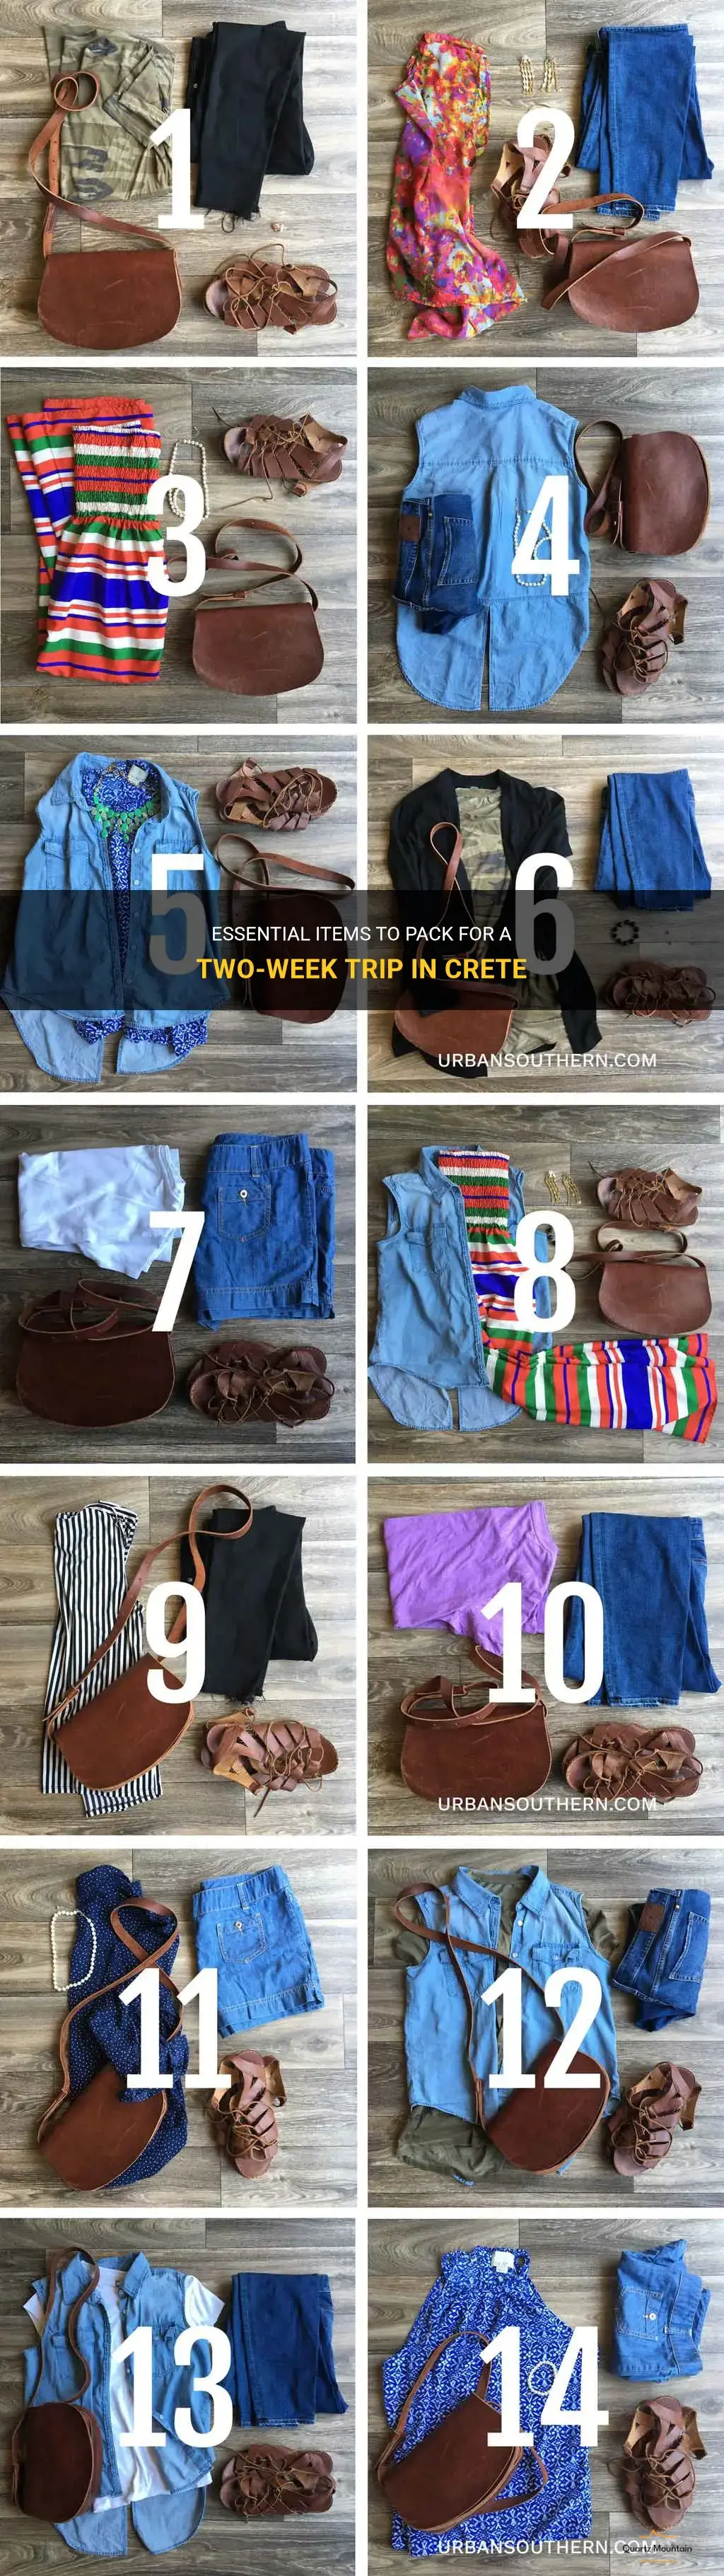 what to pack for 2 weeks in crete